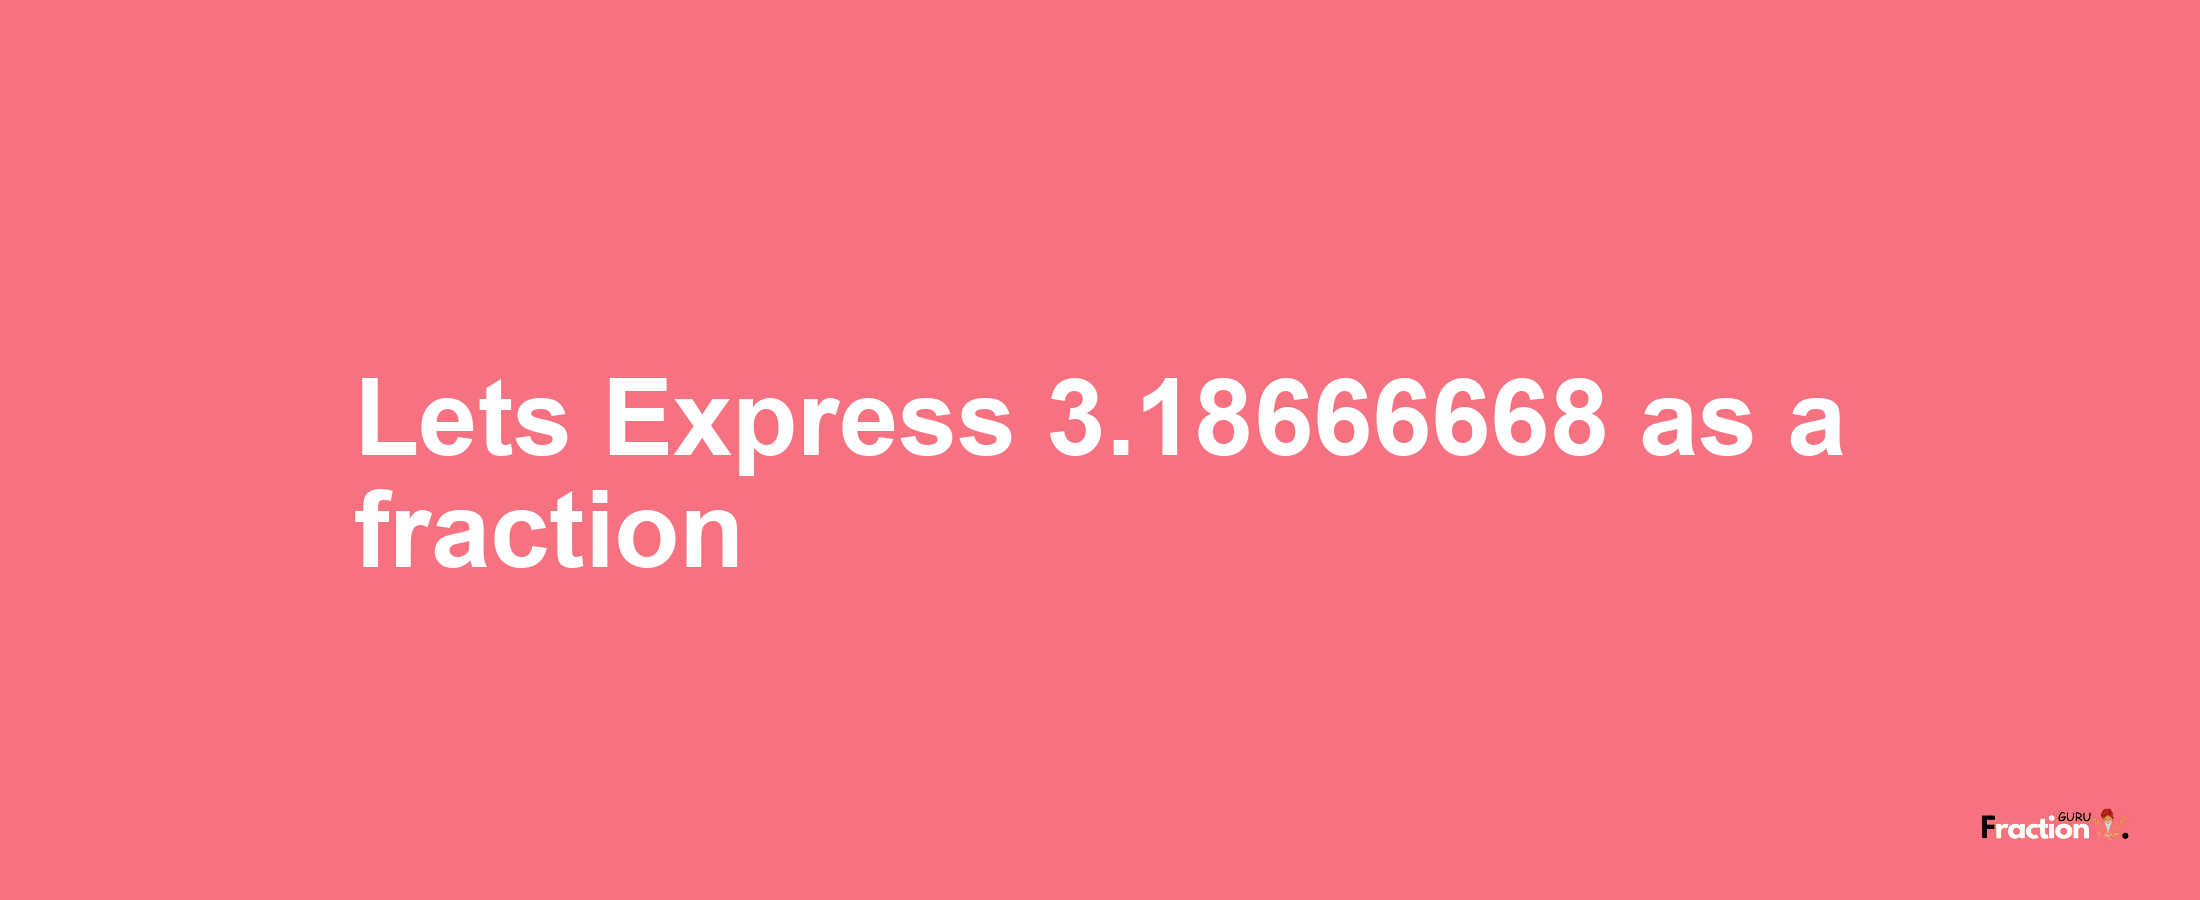 Lets Express 3.18666668 as afraction